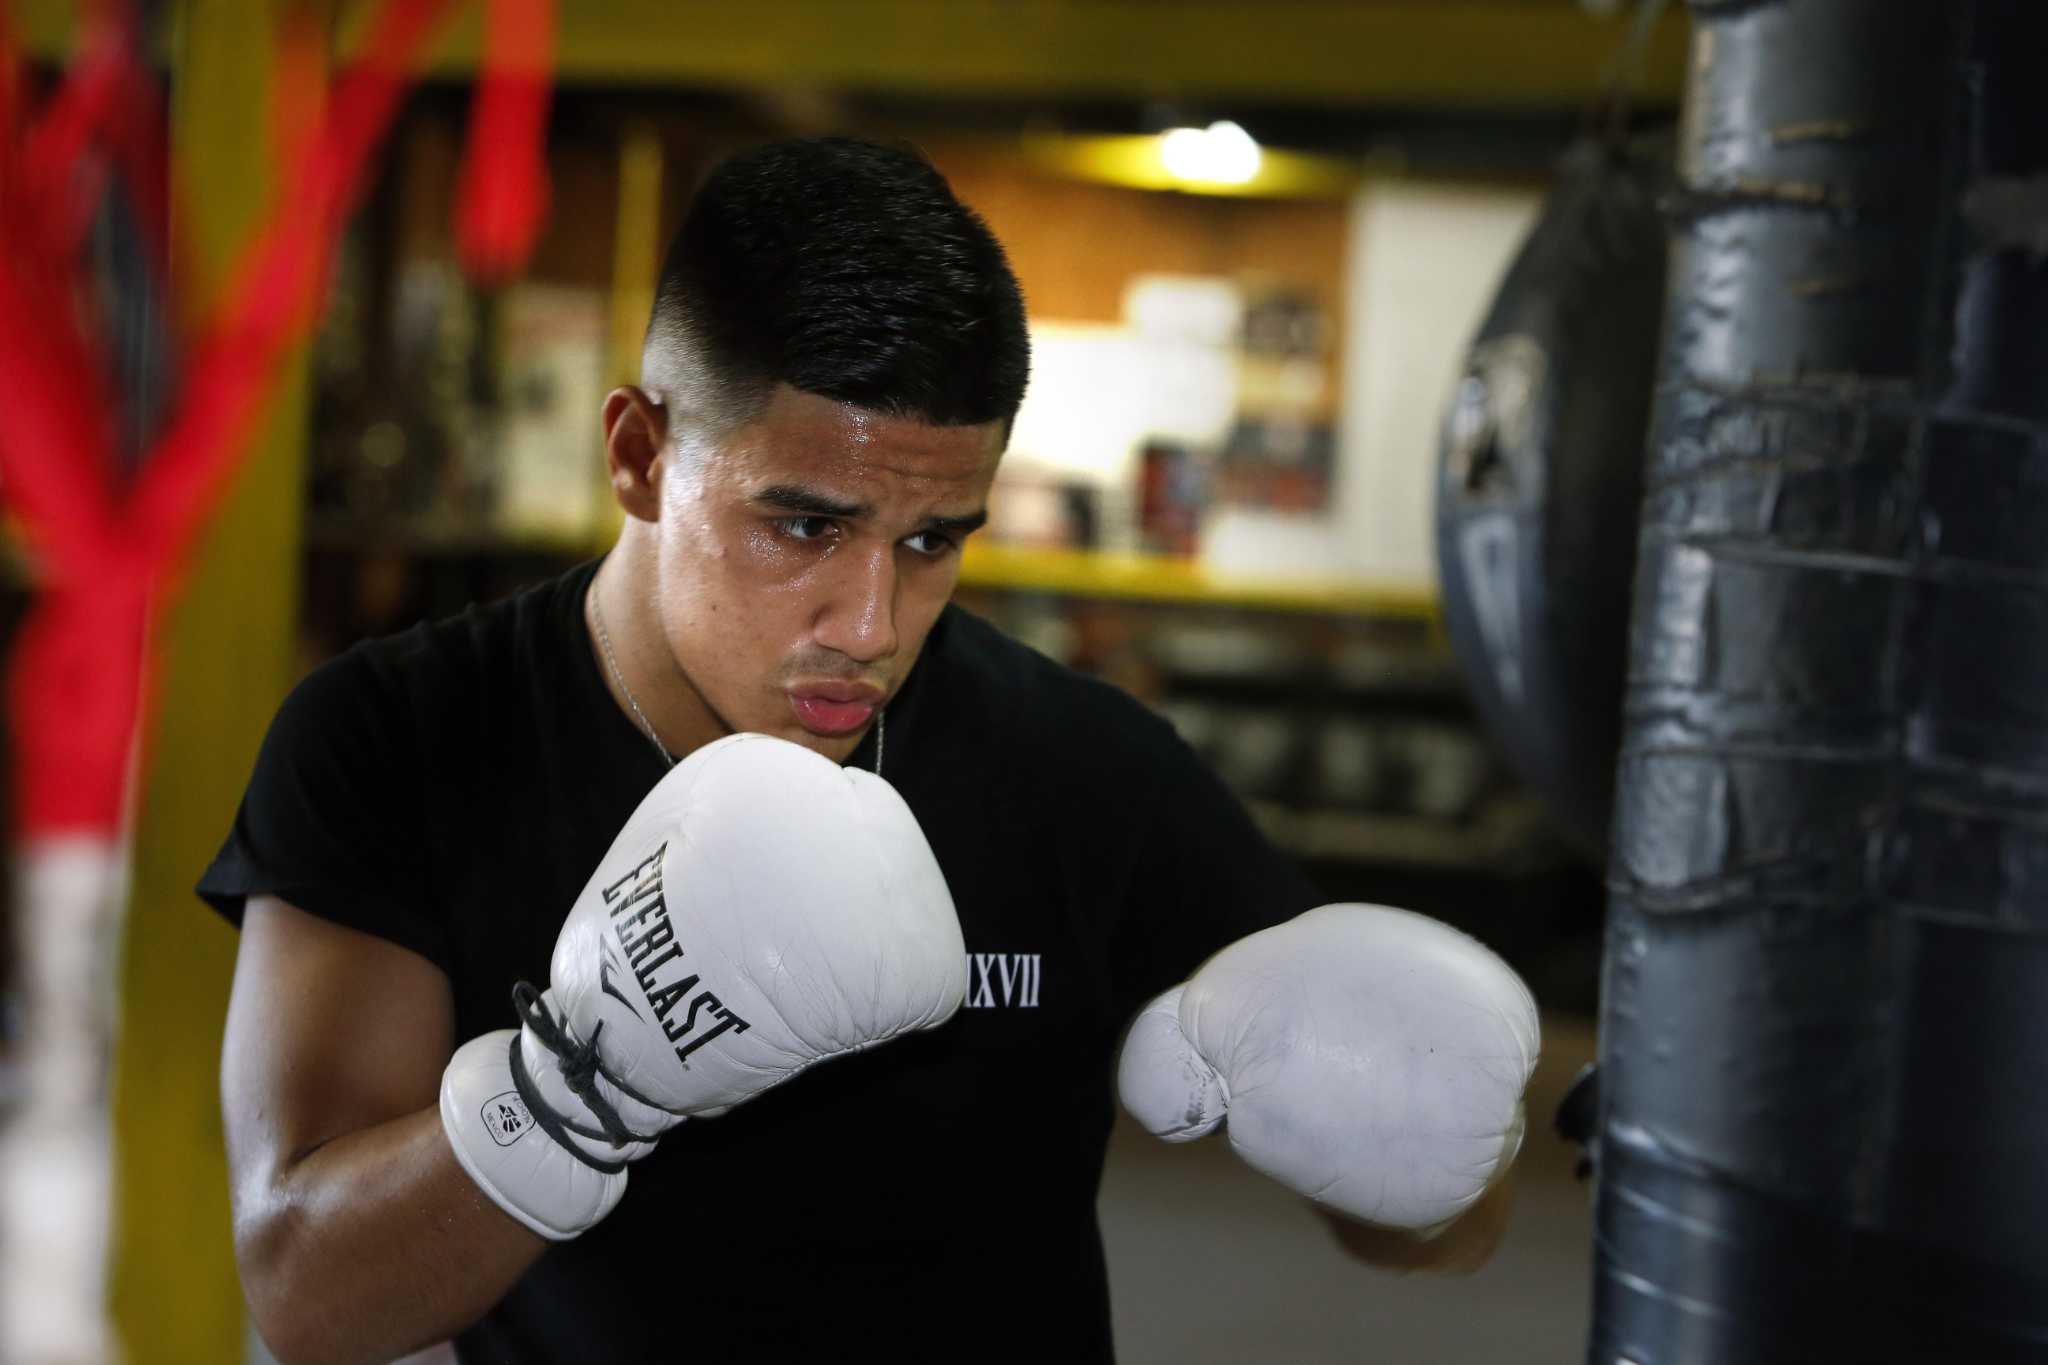 Boxing Medina, Bam present a 1-2 punch for fans on June 25 card photo picture